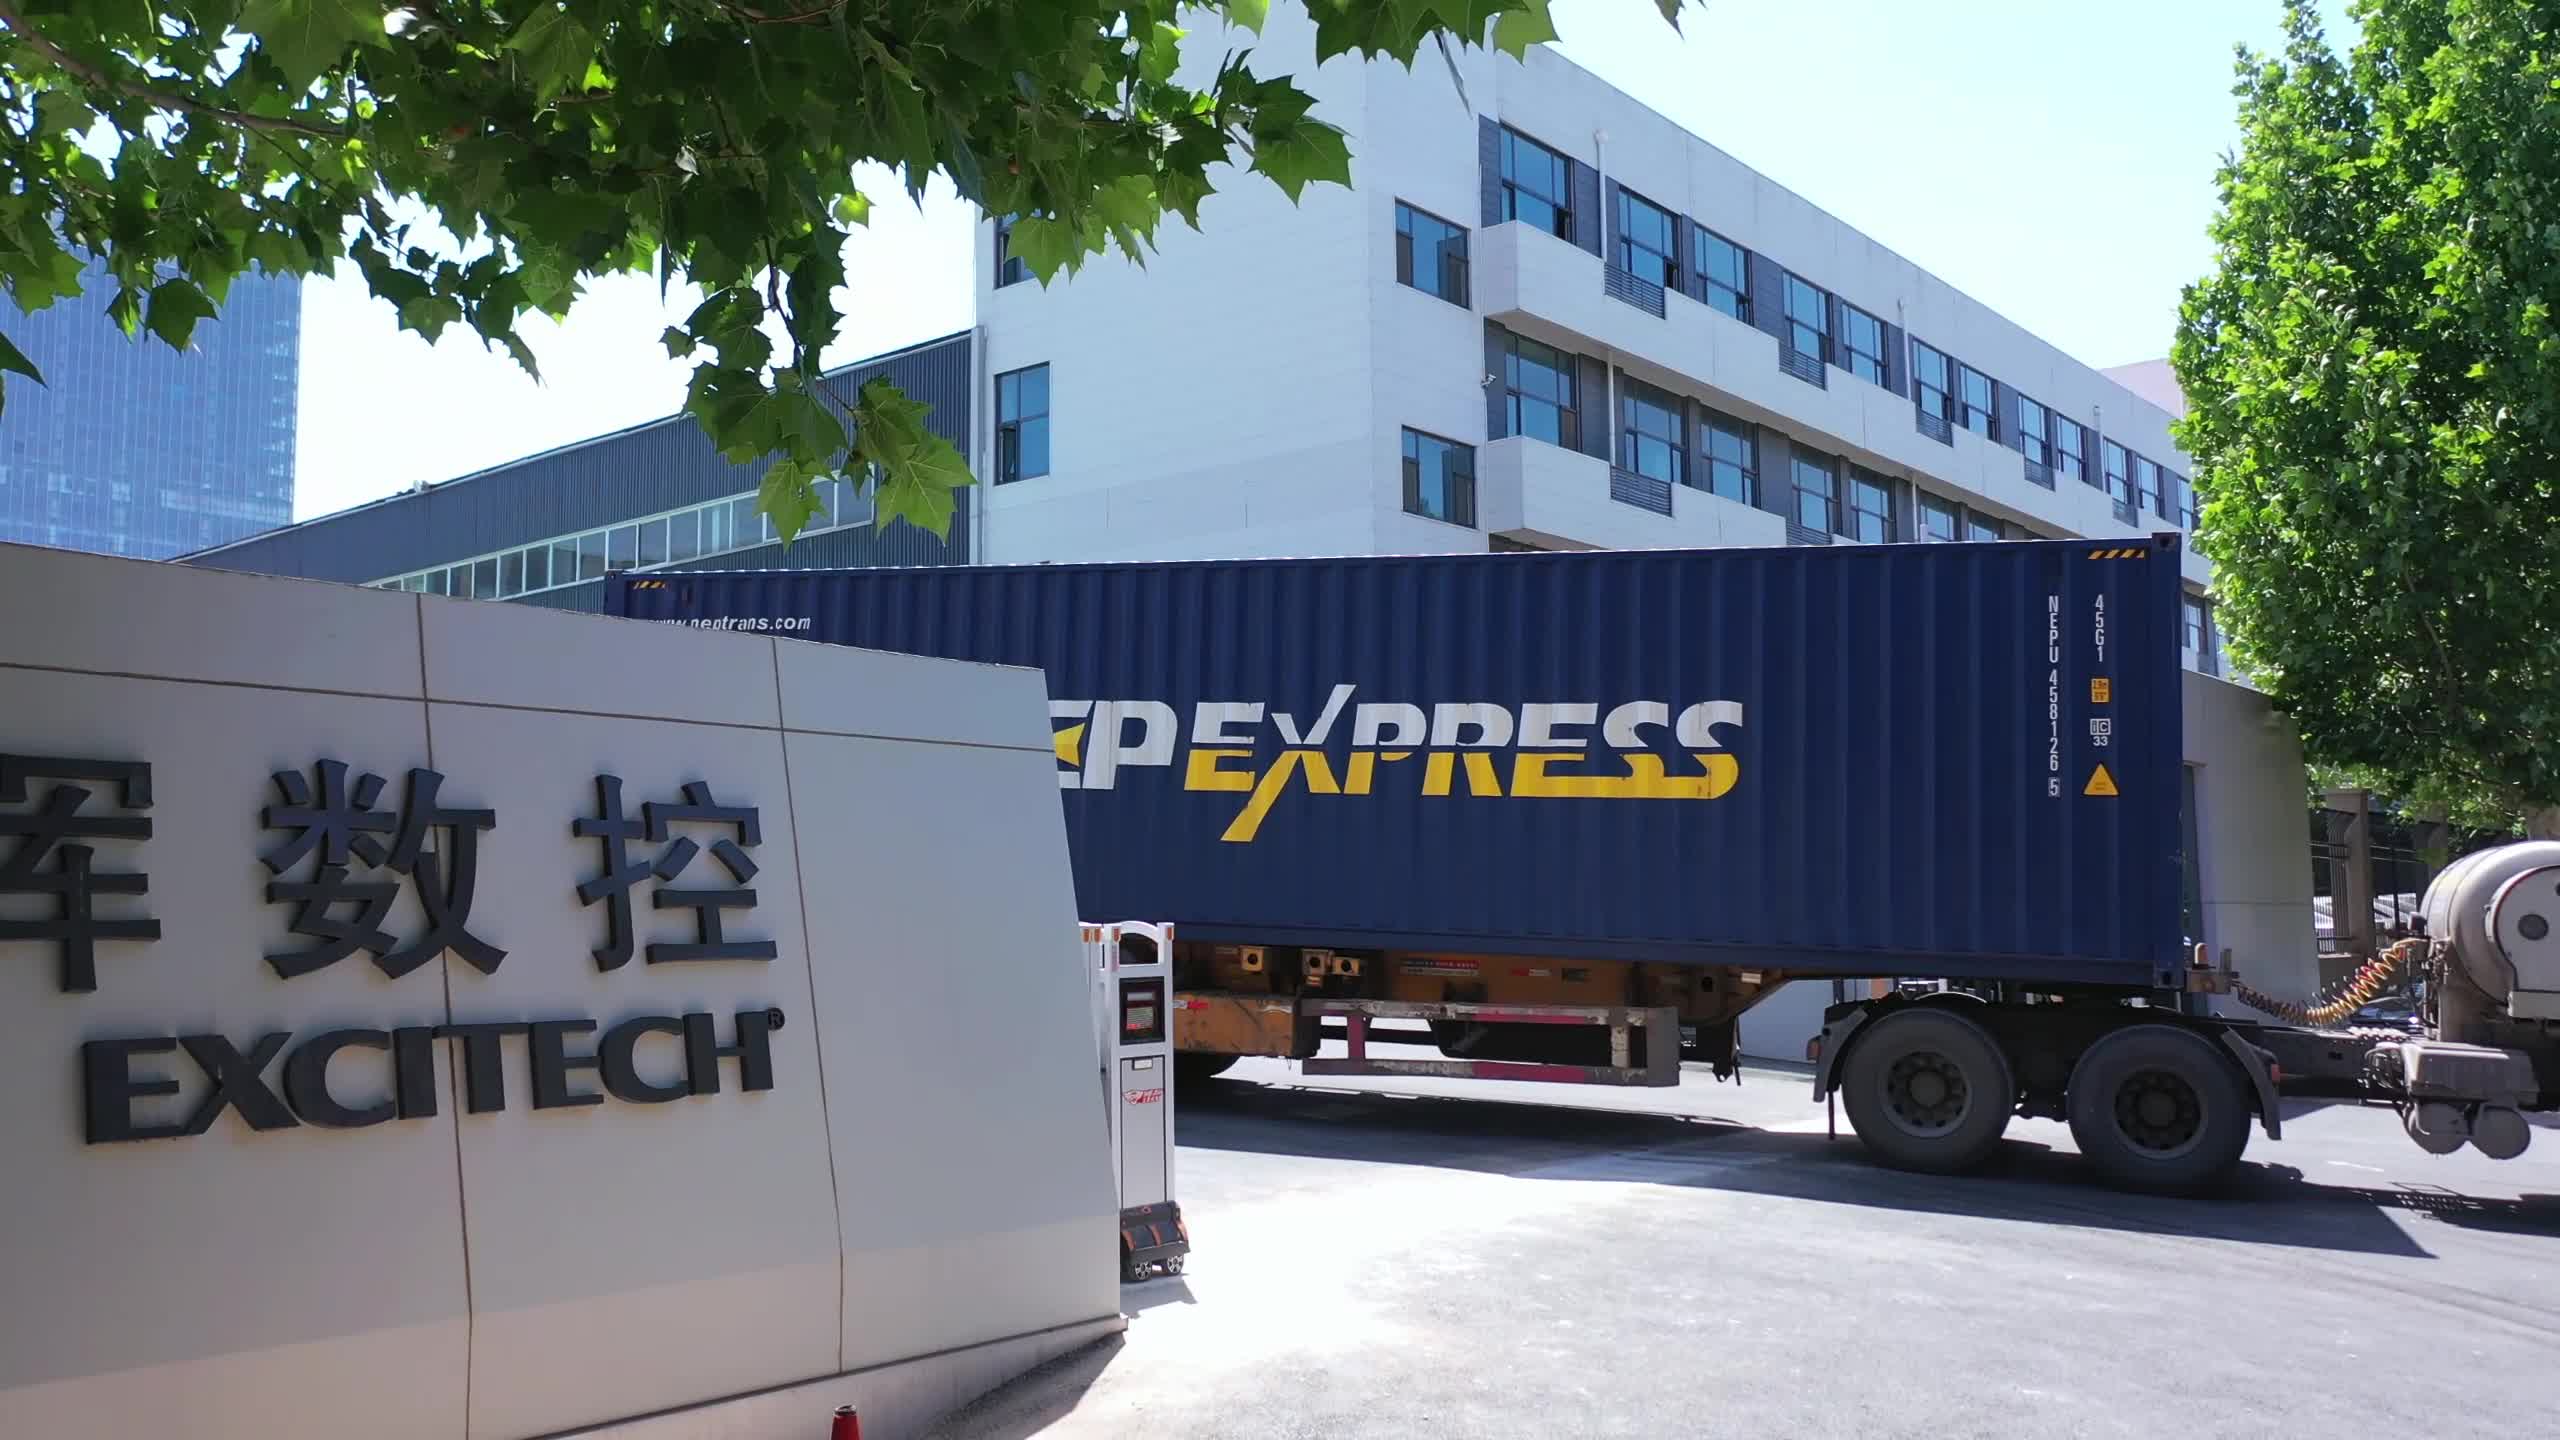 Excitech factory is sending customers' orders. Deliver the goods safely to the customer's factory